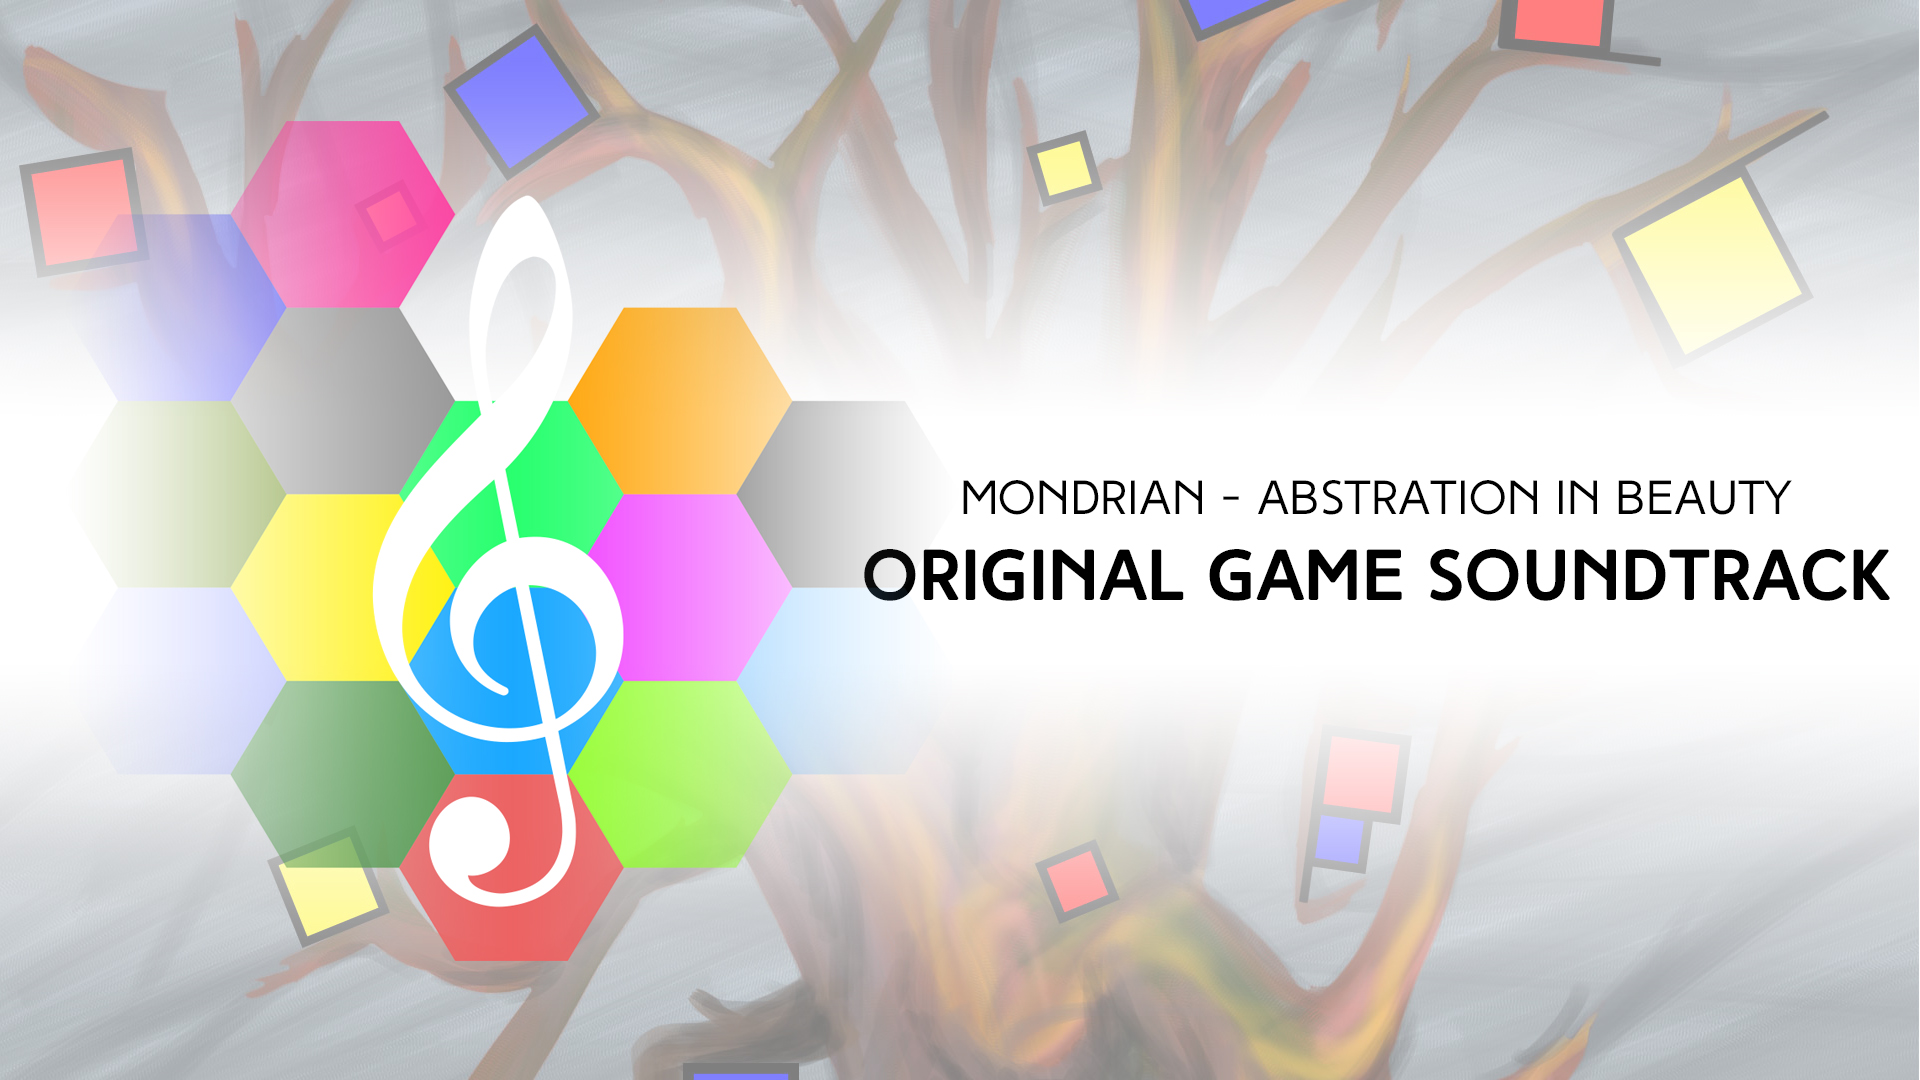 Mondrian - Abstraction in Beauty: Original Game Soundtrack Featured Screenshot #1